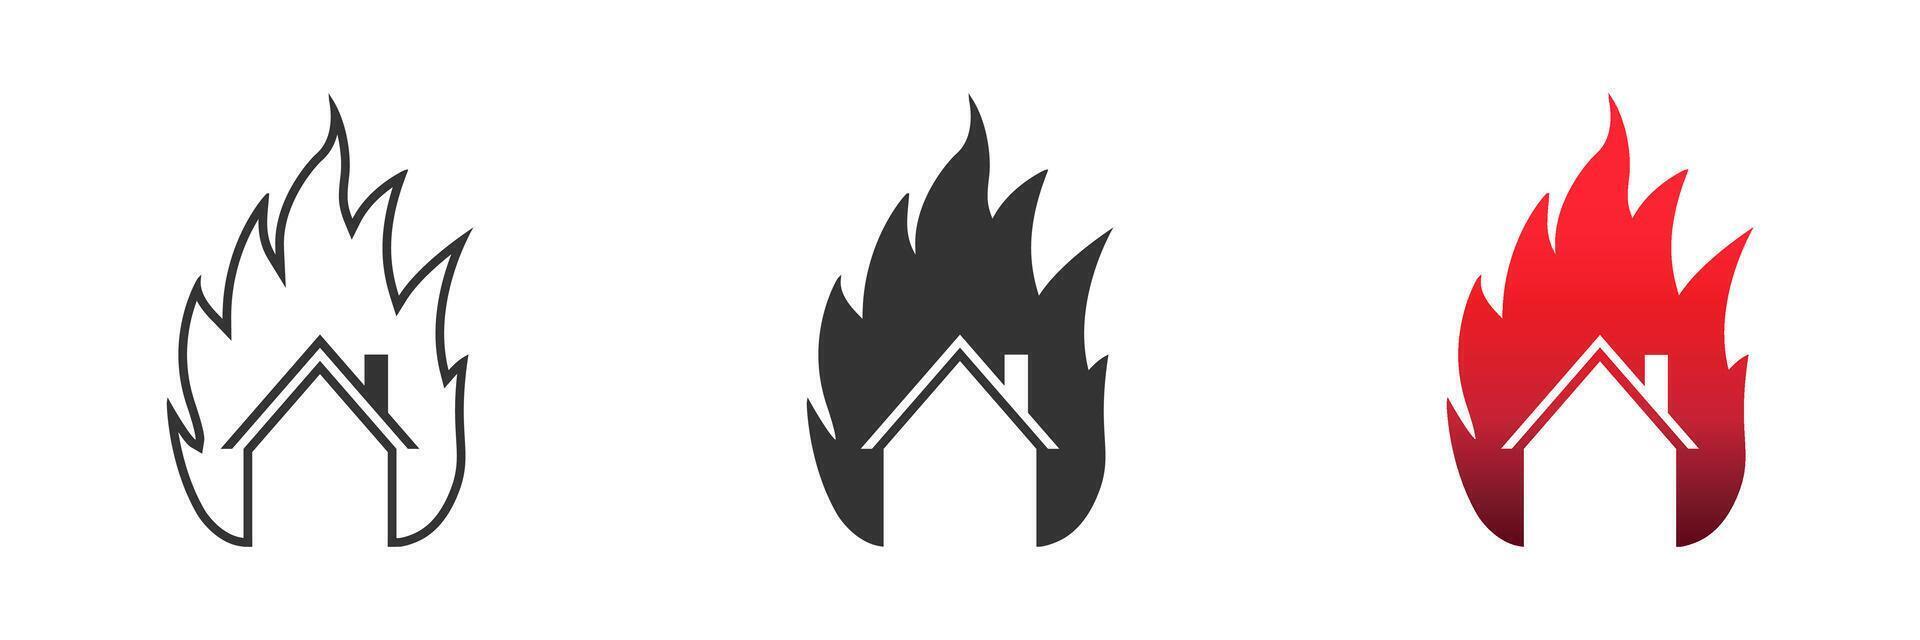 House on fire icon. House building in flames. Home fire symbol. Vector illustration.